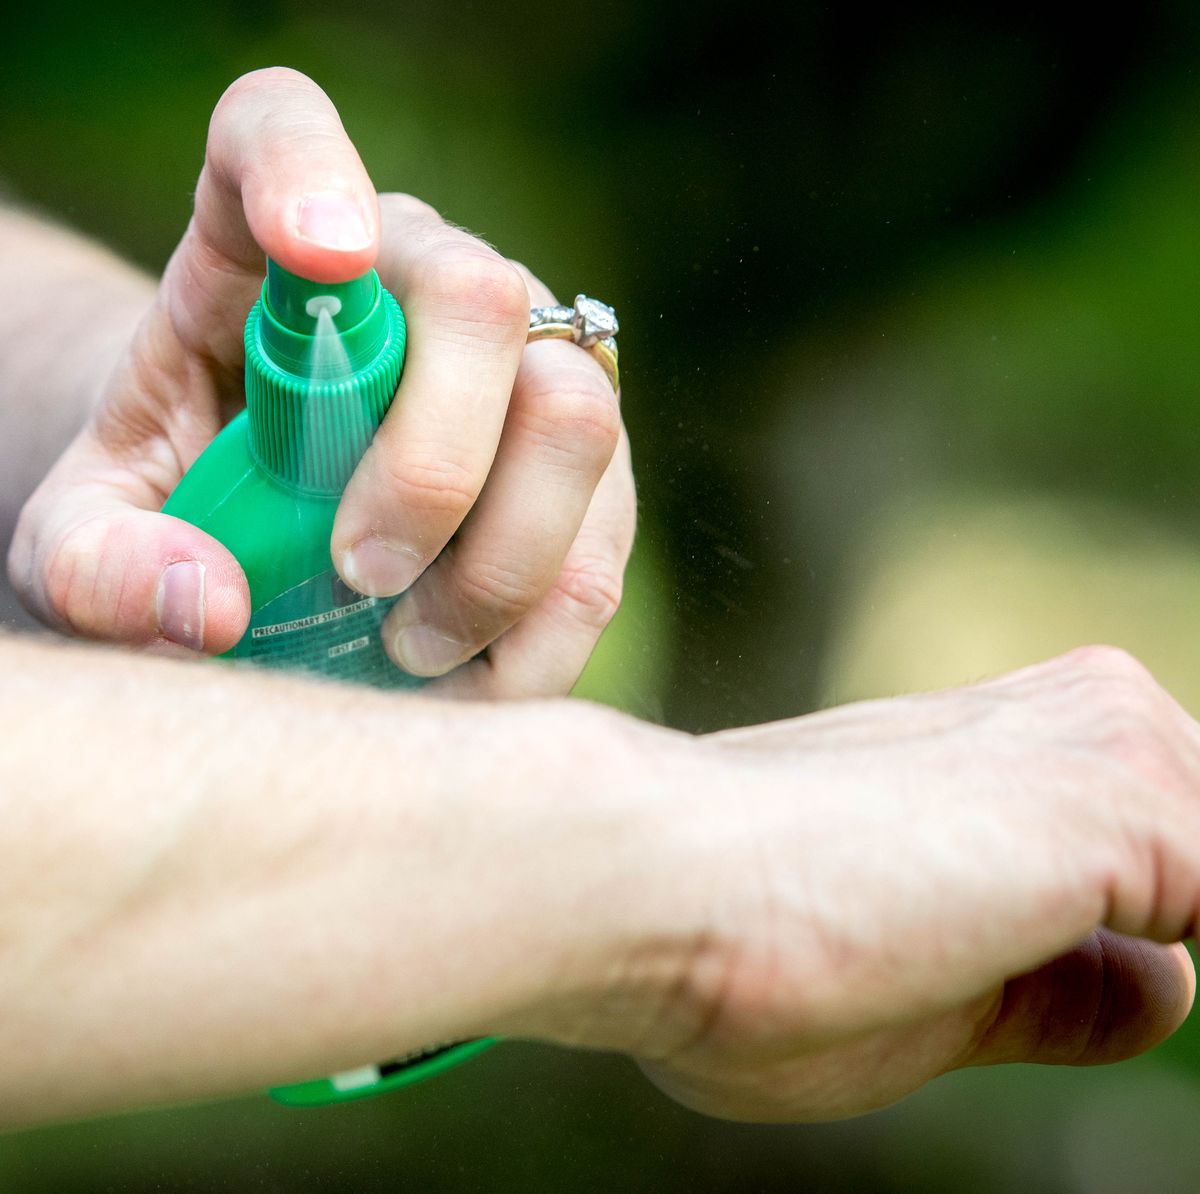 Woman sprays herself with mosquito repellent